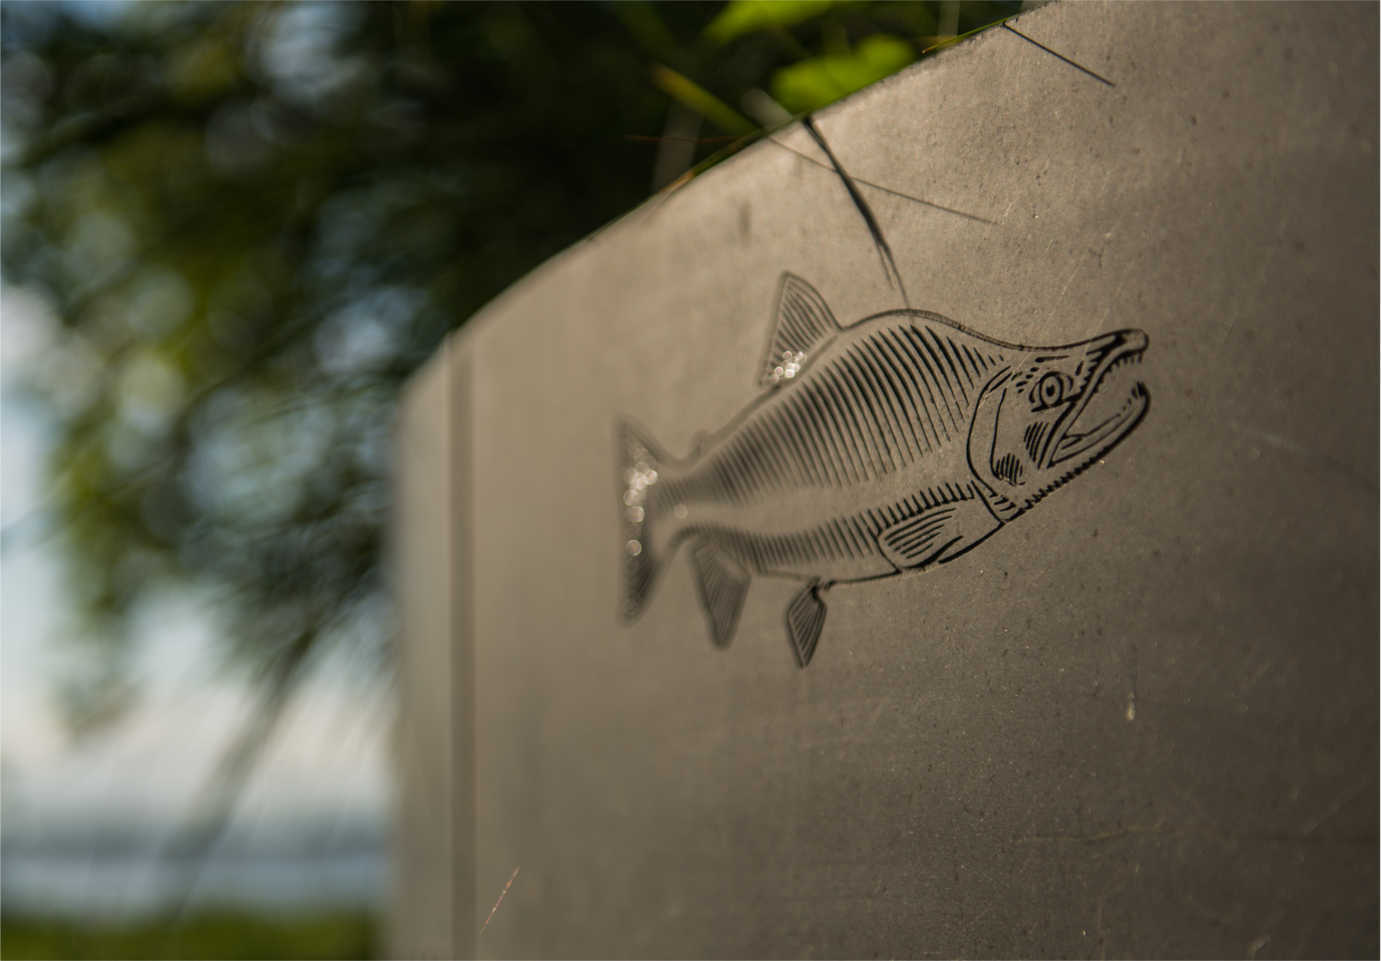 At the Confluence Story Circles at Sacajawea State Park in Pasco, Washington, one of Maya Lin's installations, a Columbia River salmon is etched into the basalt. Photo by Corky Miller.